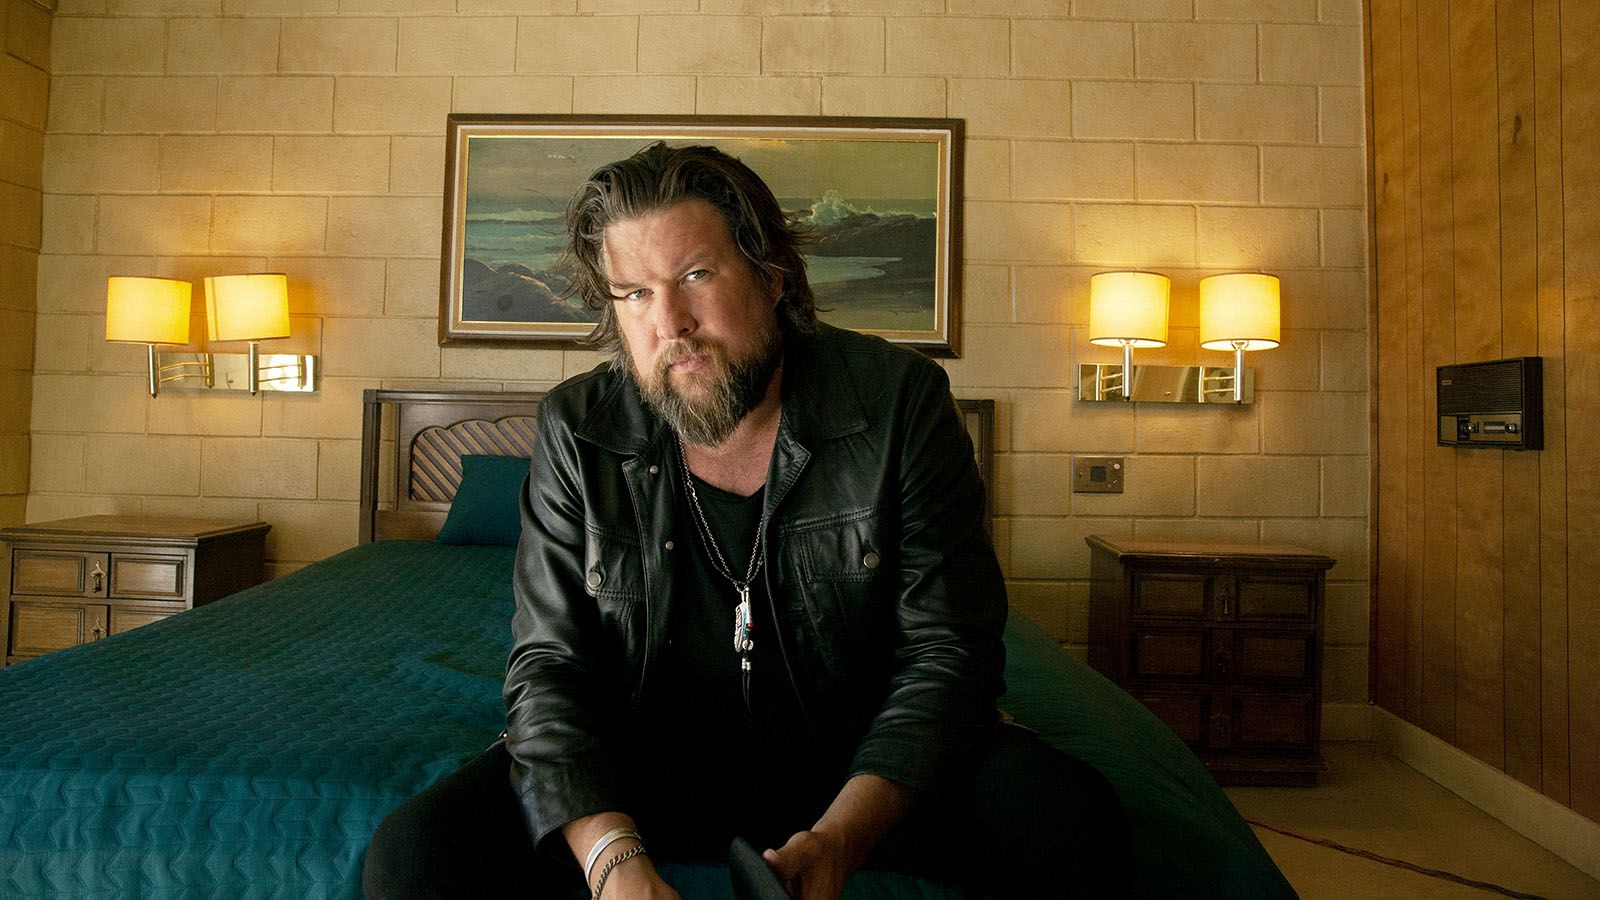 Zach Williams will be at Embassy Theatre on Wednesday, April 26, with opening act Blessing Offor.